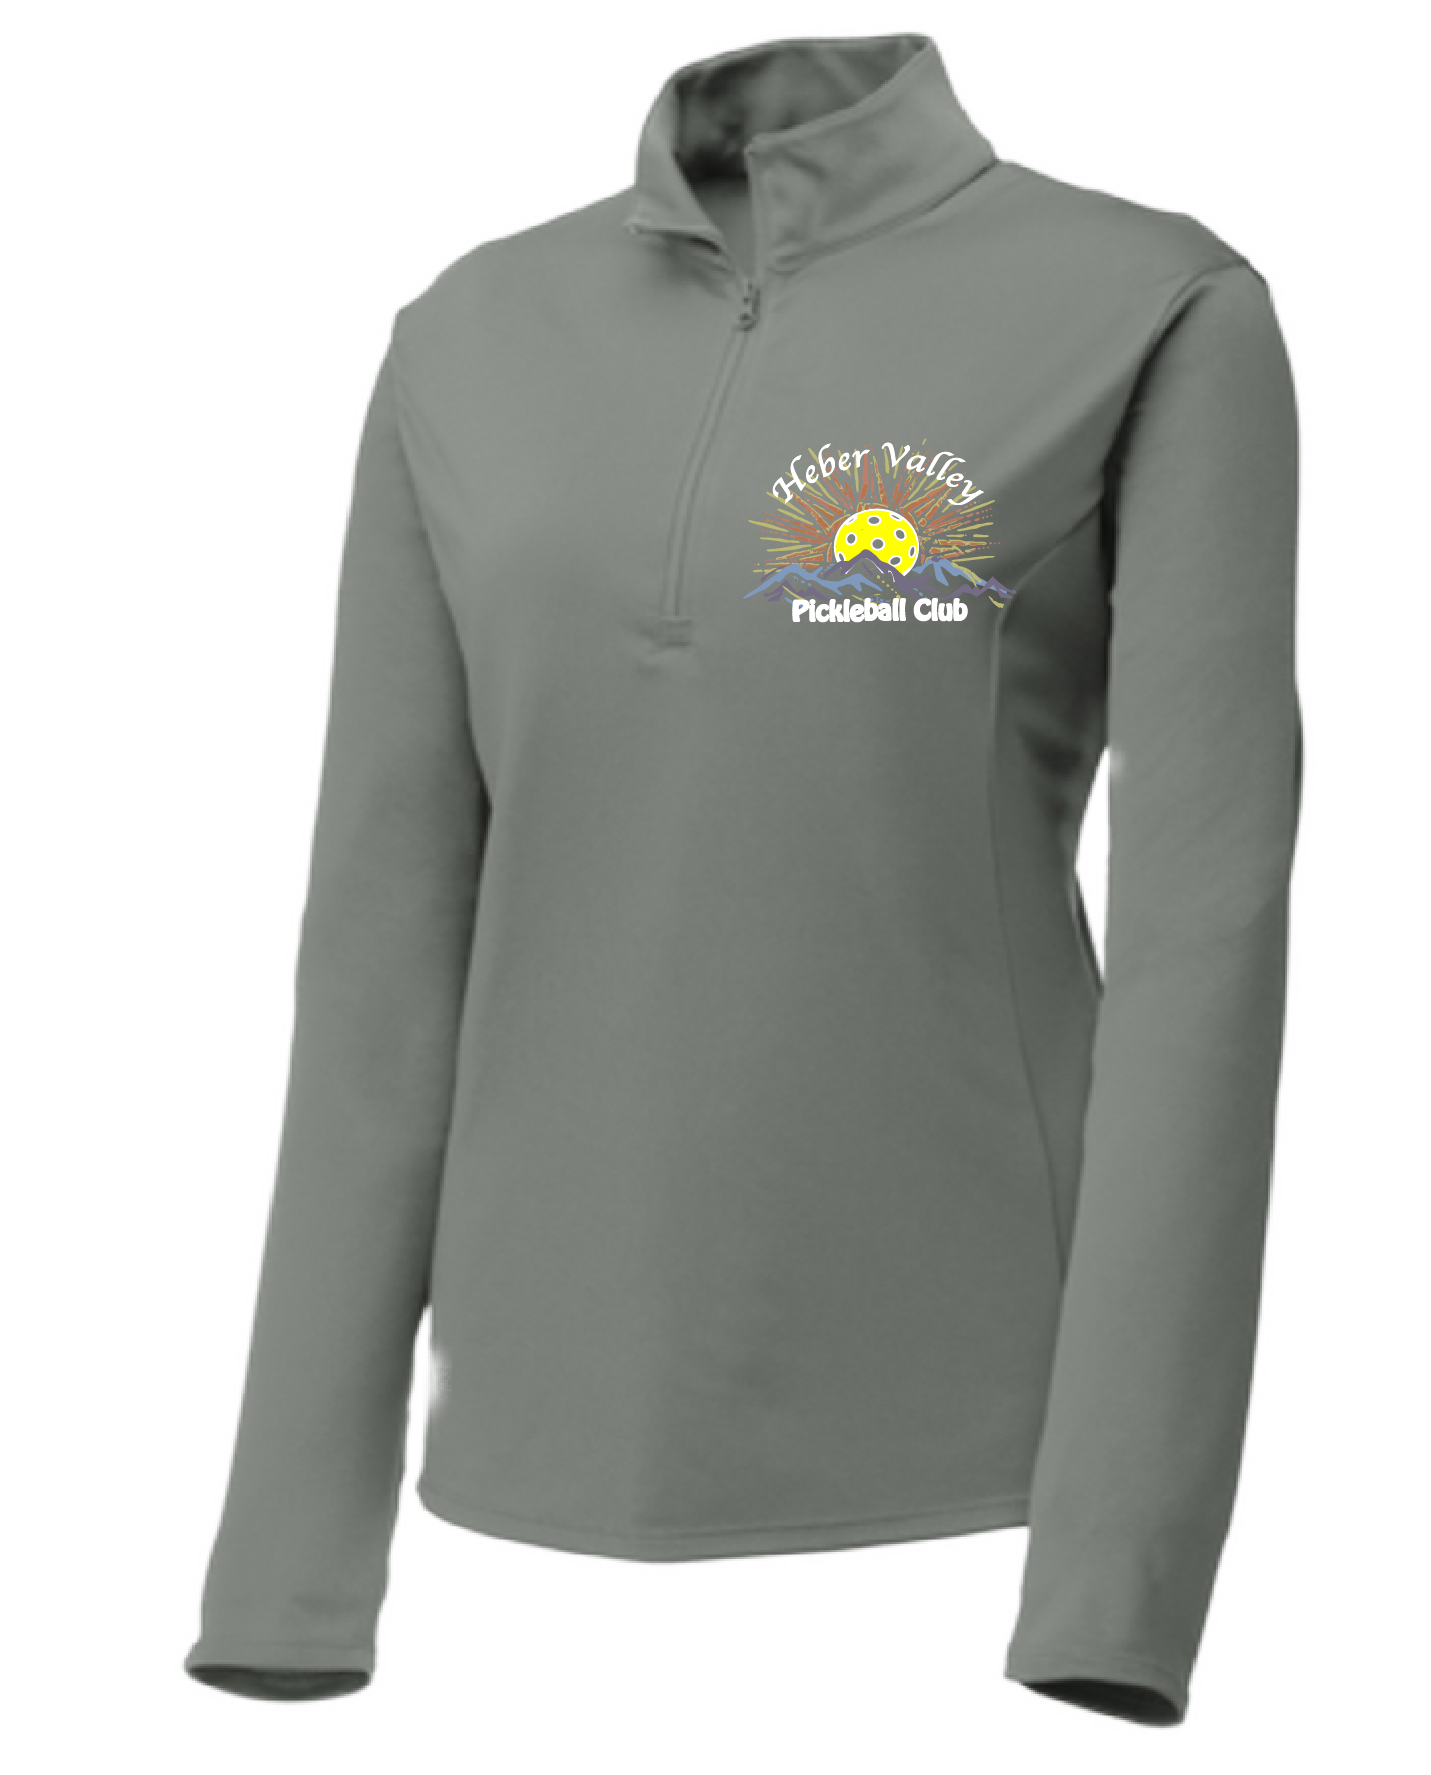 Pickleball Shirt Design: Heber Valley Pickleball Club  Customize Size and Location of Design:  Large Full Back or Small Pocket Area  Women's 1/4-Zip Pullover: Princess seams and drop tail hem.  Turn up the volume in this Women's shirt with its perfect mix of softness and attitude. Material is ultra-comfortable with moisture wicking properties and tri-blend softness. PosiCharge technology locks in color. Highly breathable and lightweight. Versatile enough for wearing year-round.